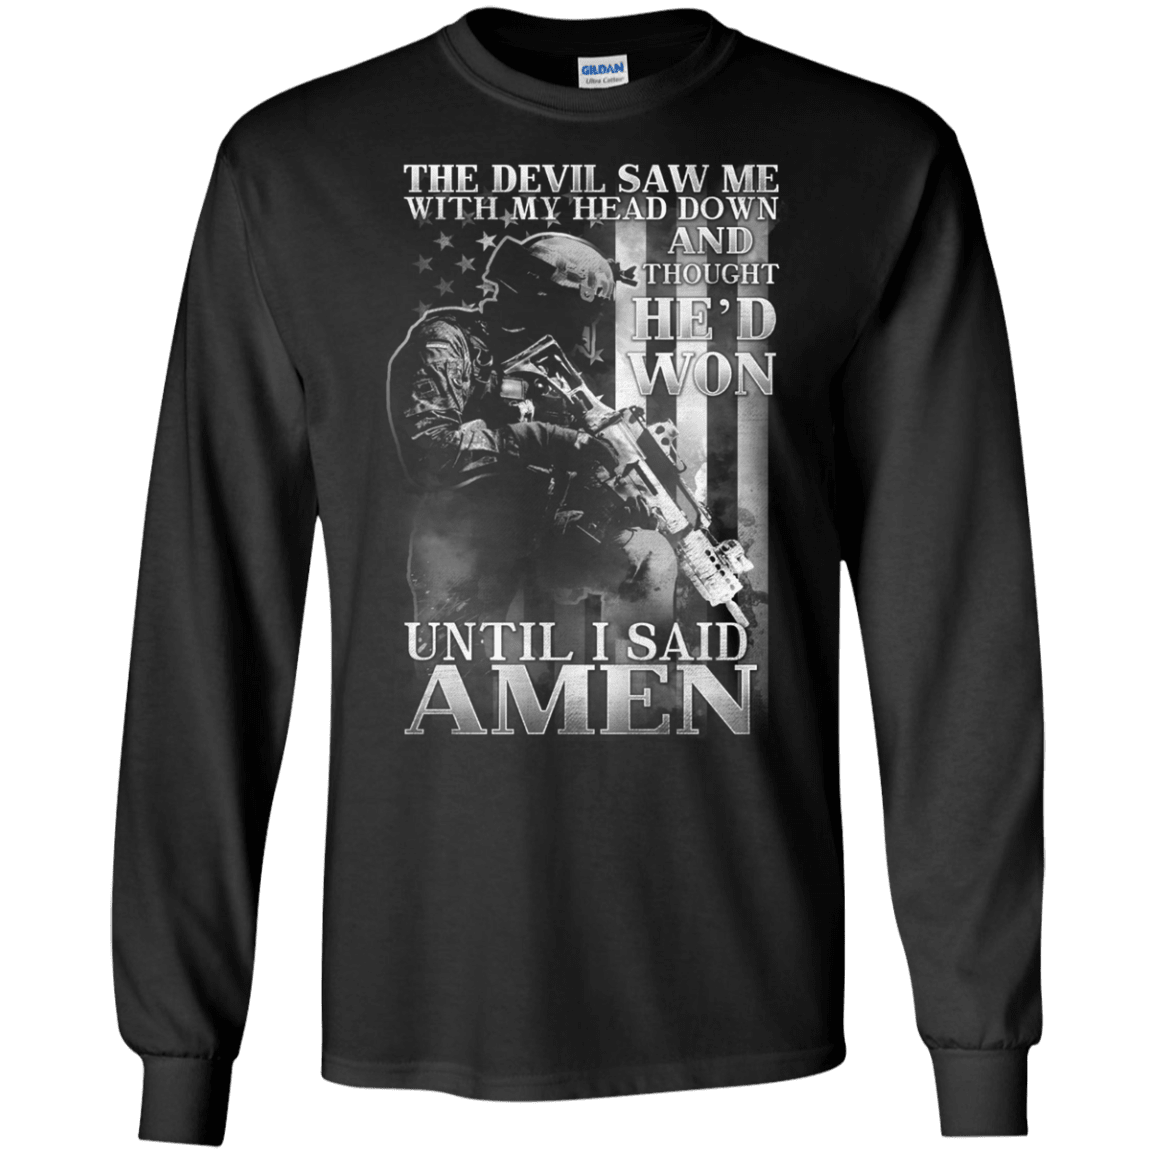 Military T-Shirt "The Devil Saw Me With My Head Down Amen Men" Front-TShirt-General-Veterans Nation